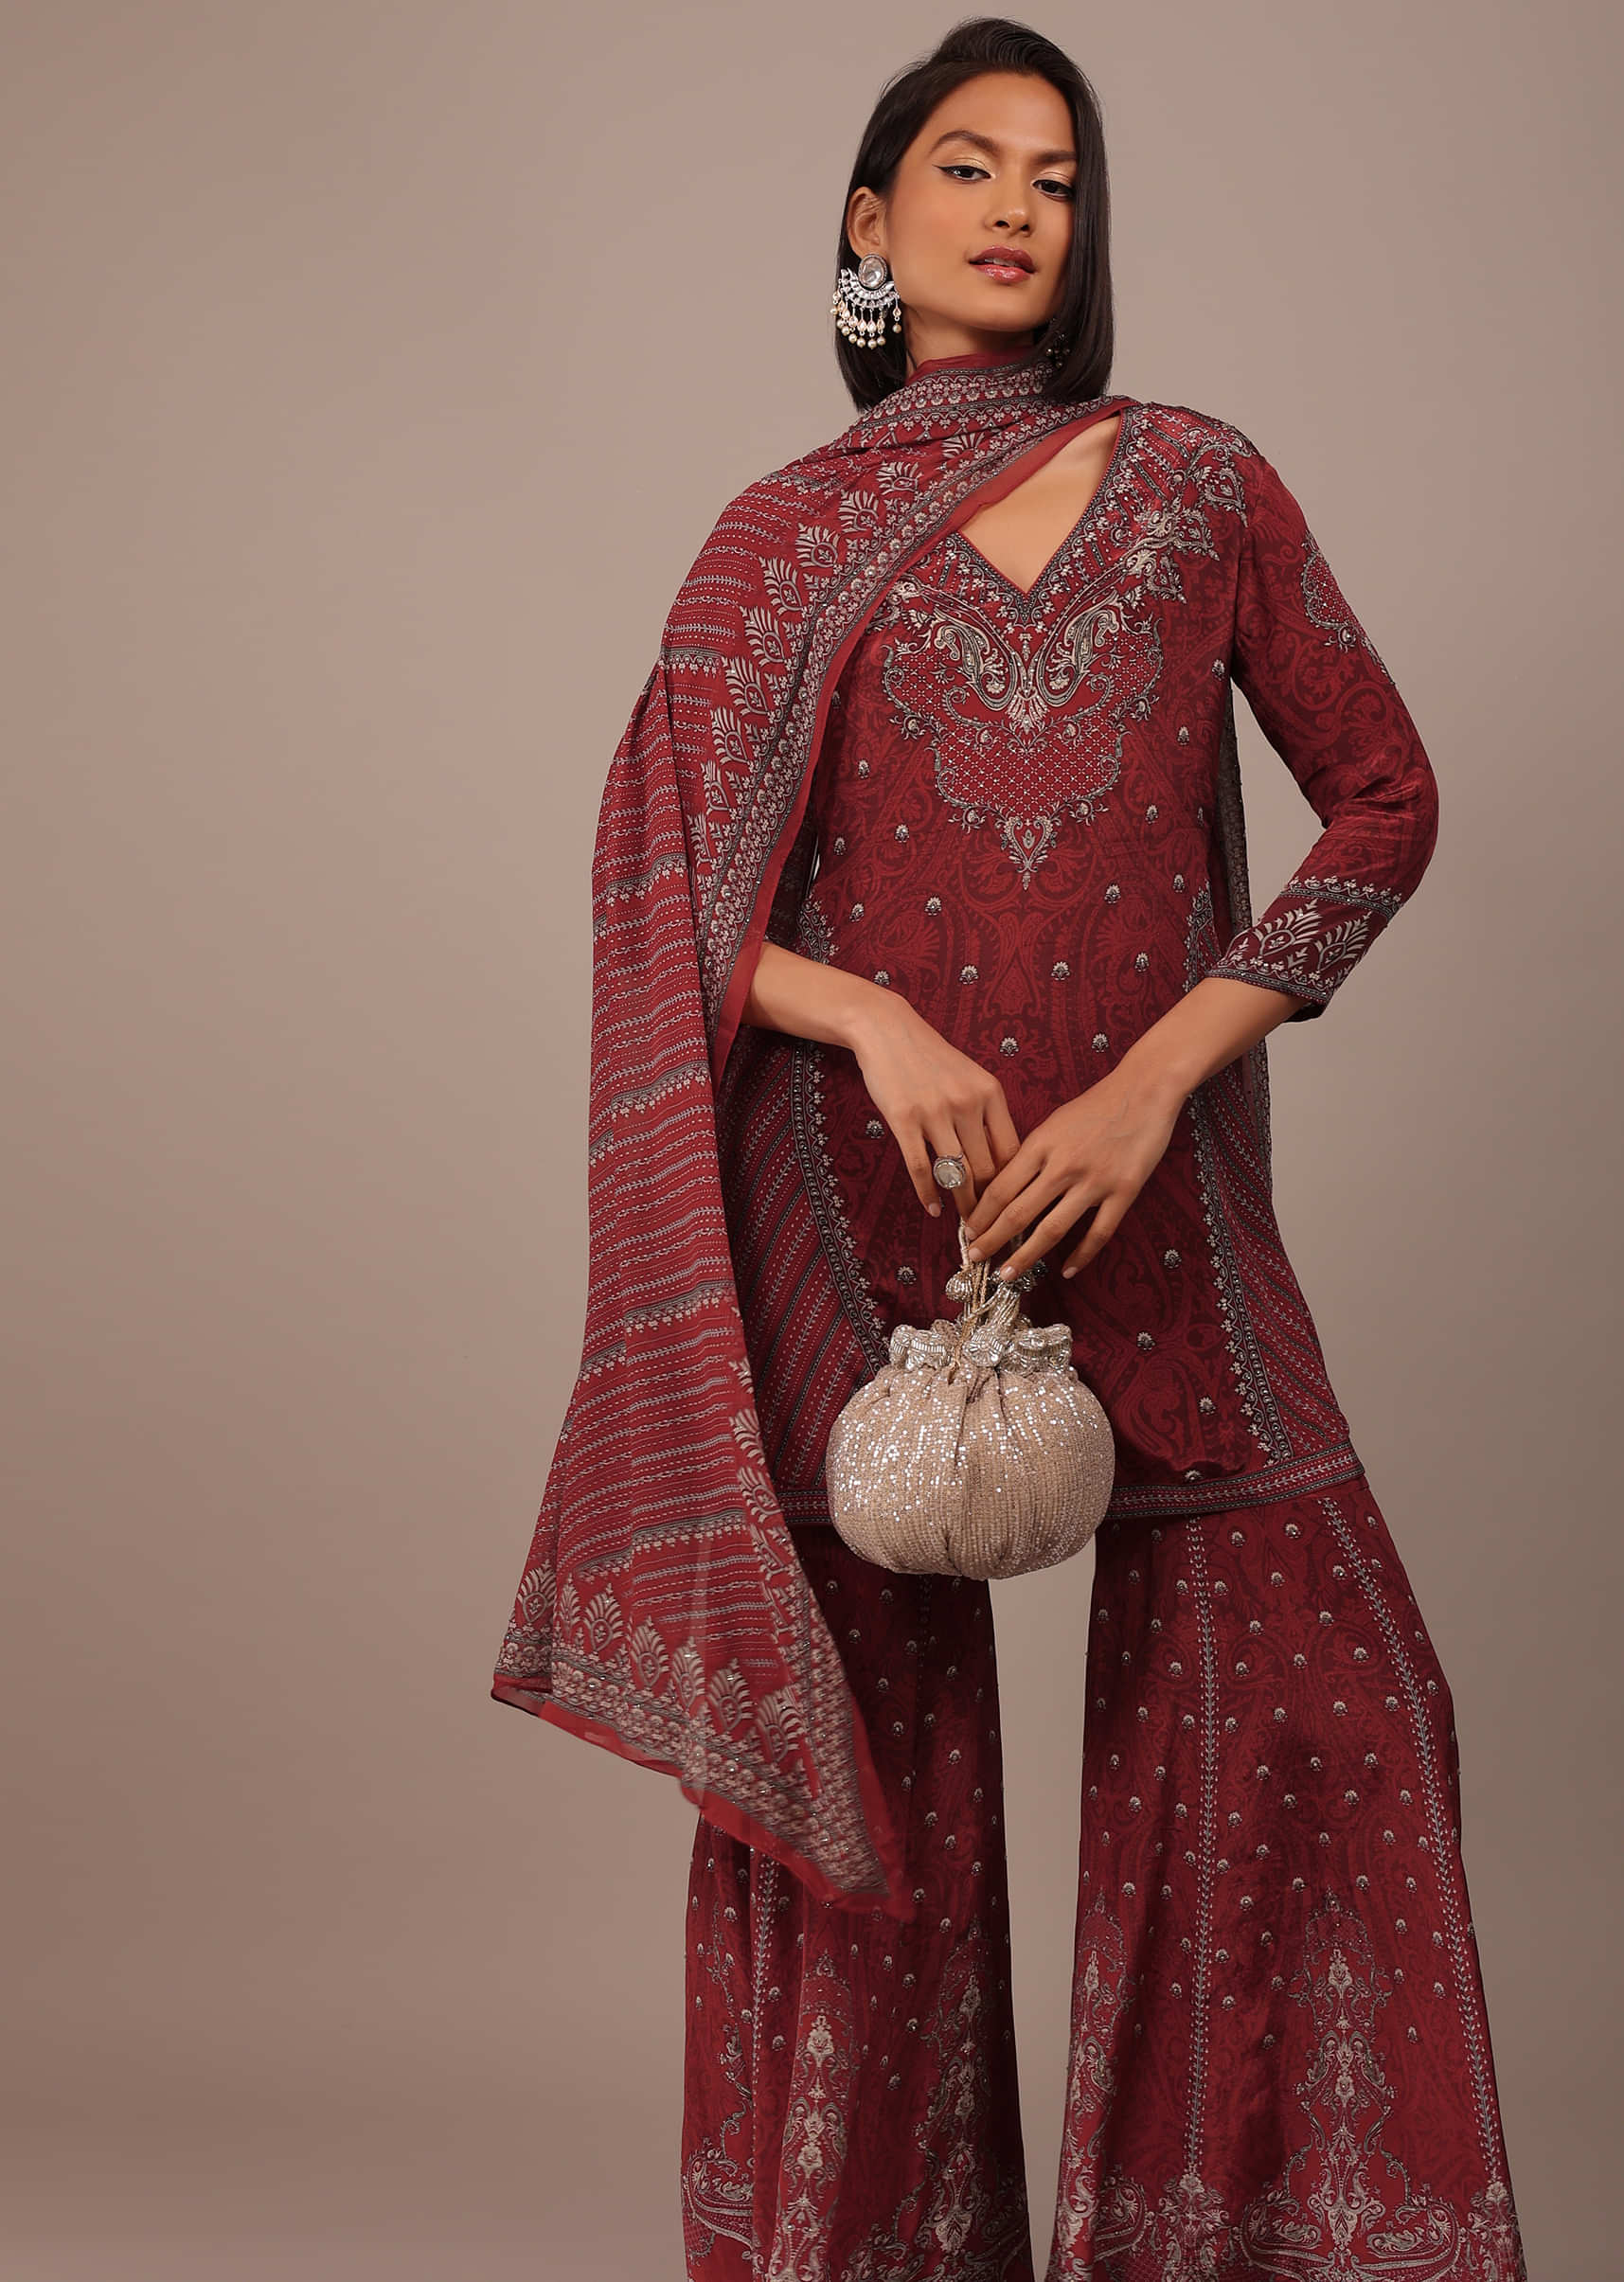 Brick Red Printed Sharara Suit With Stonework In Crepe